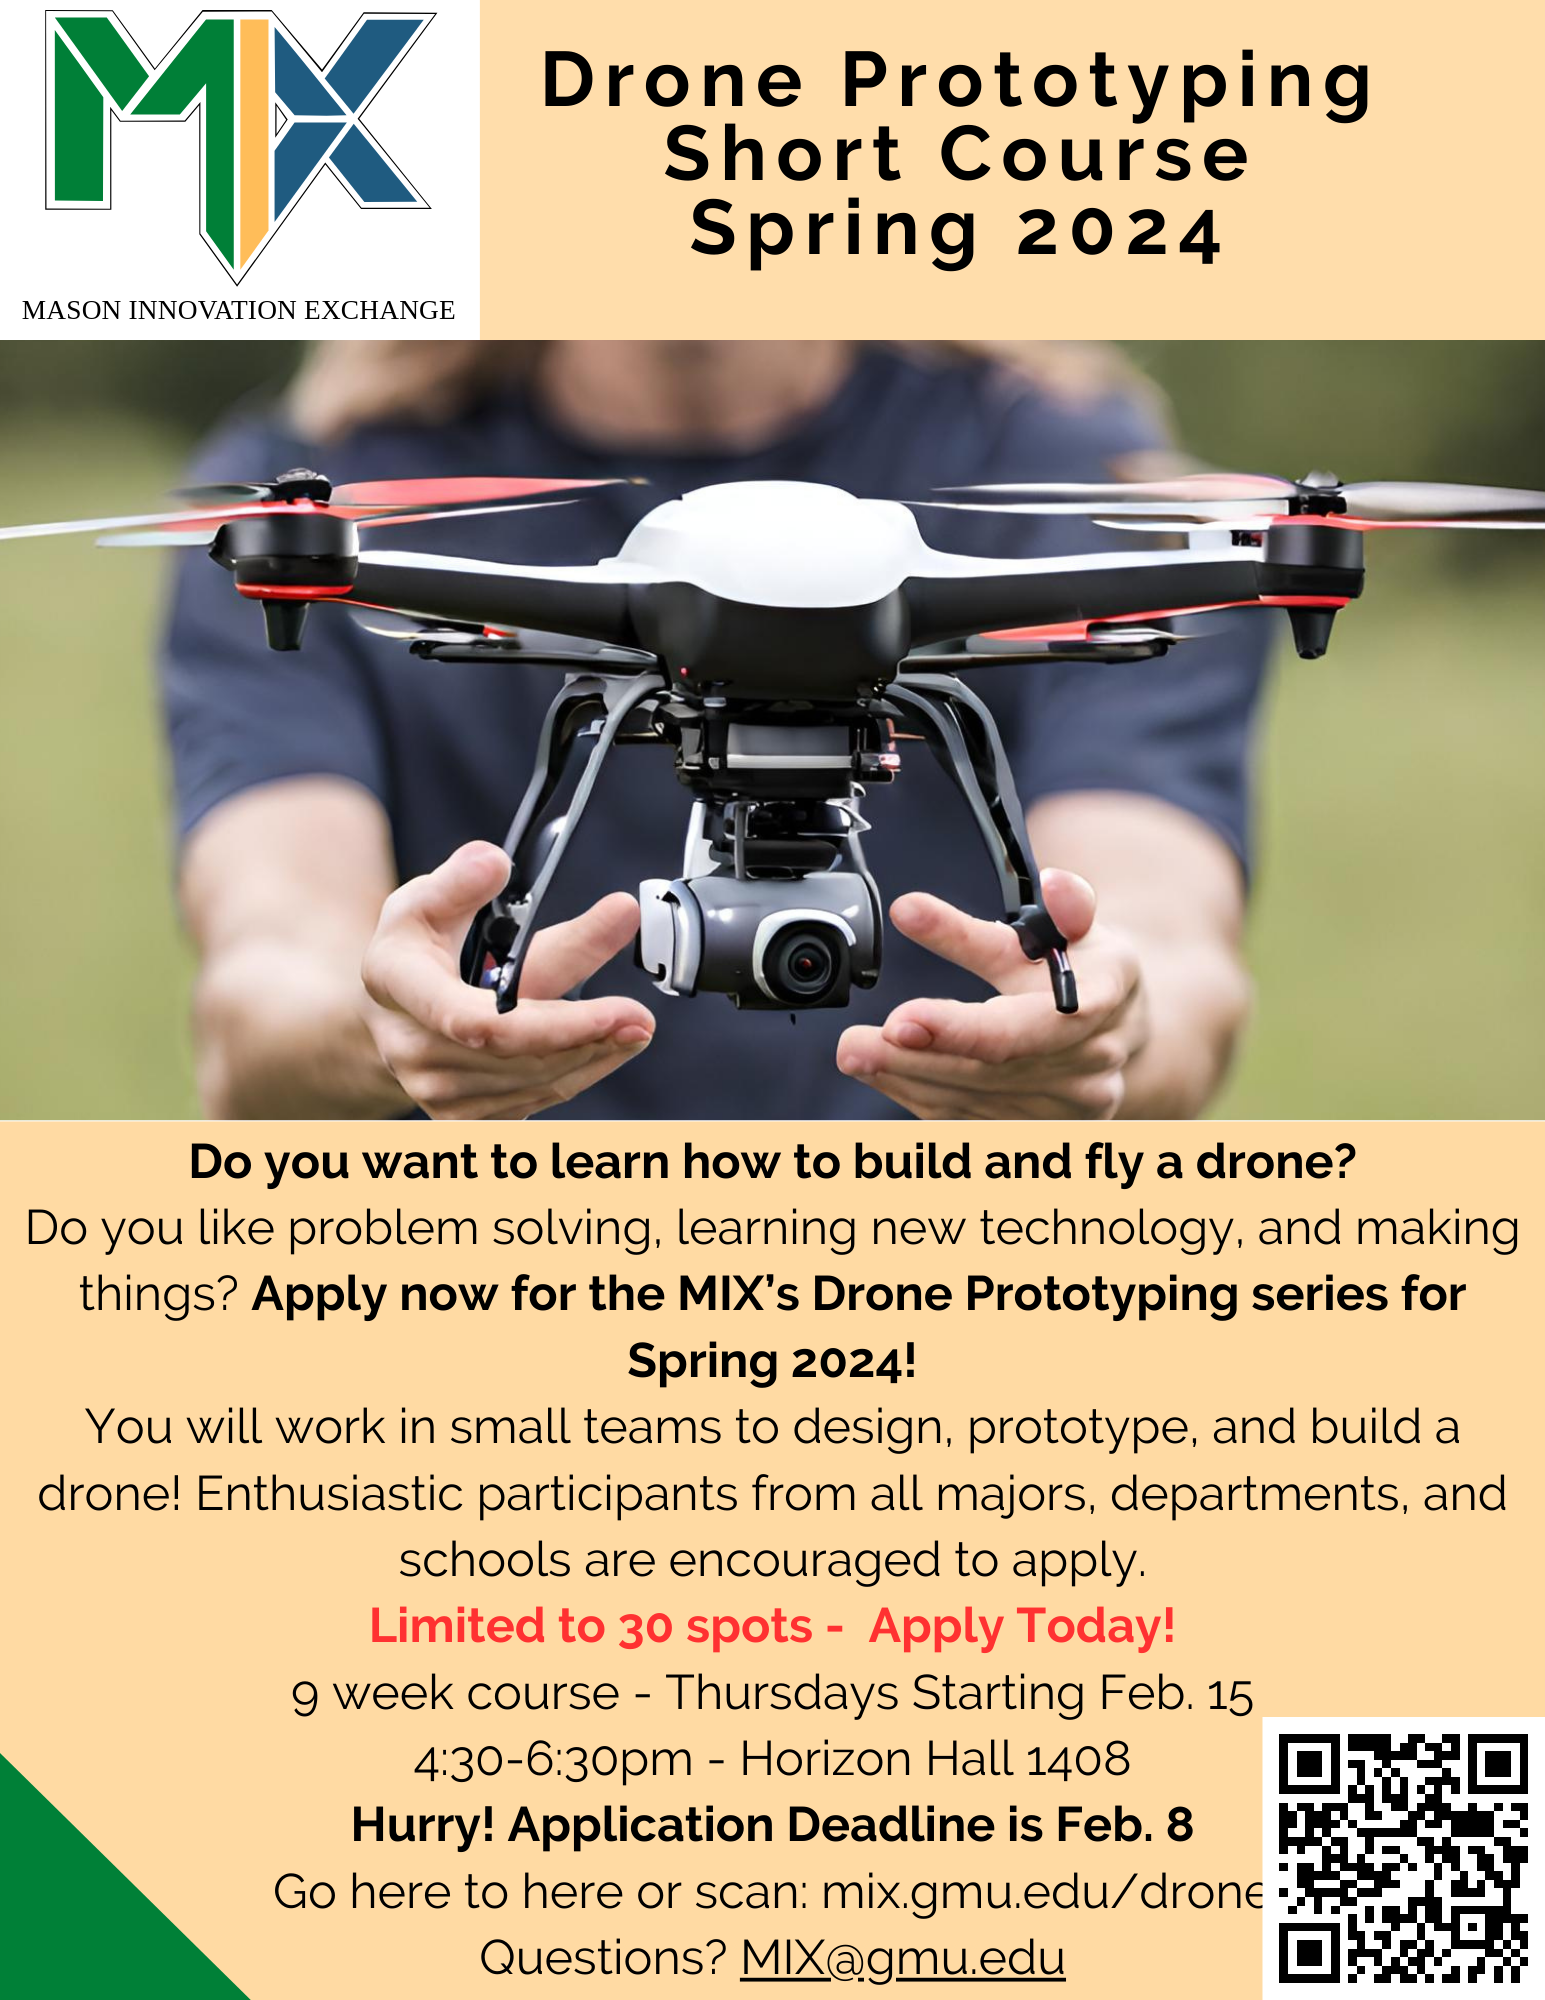 Sign up for the Mason Innovation Exchange's Drone Prototyping Workshop